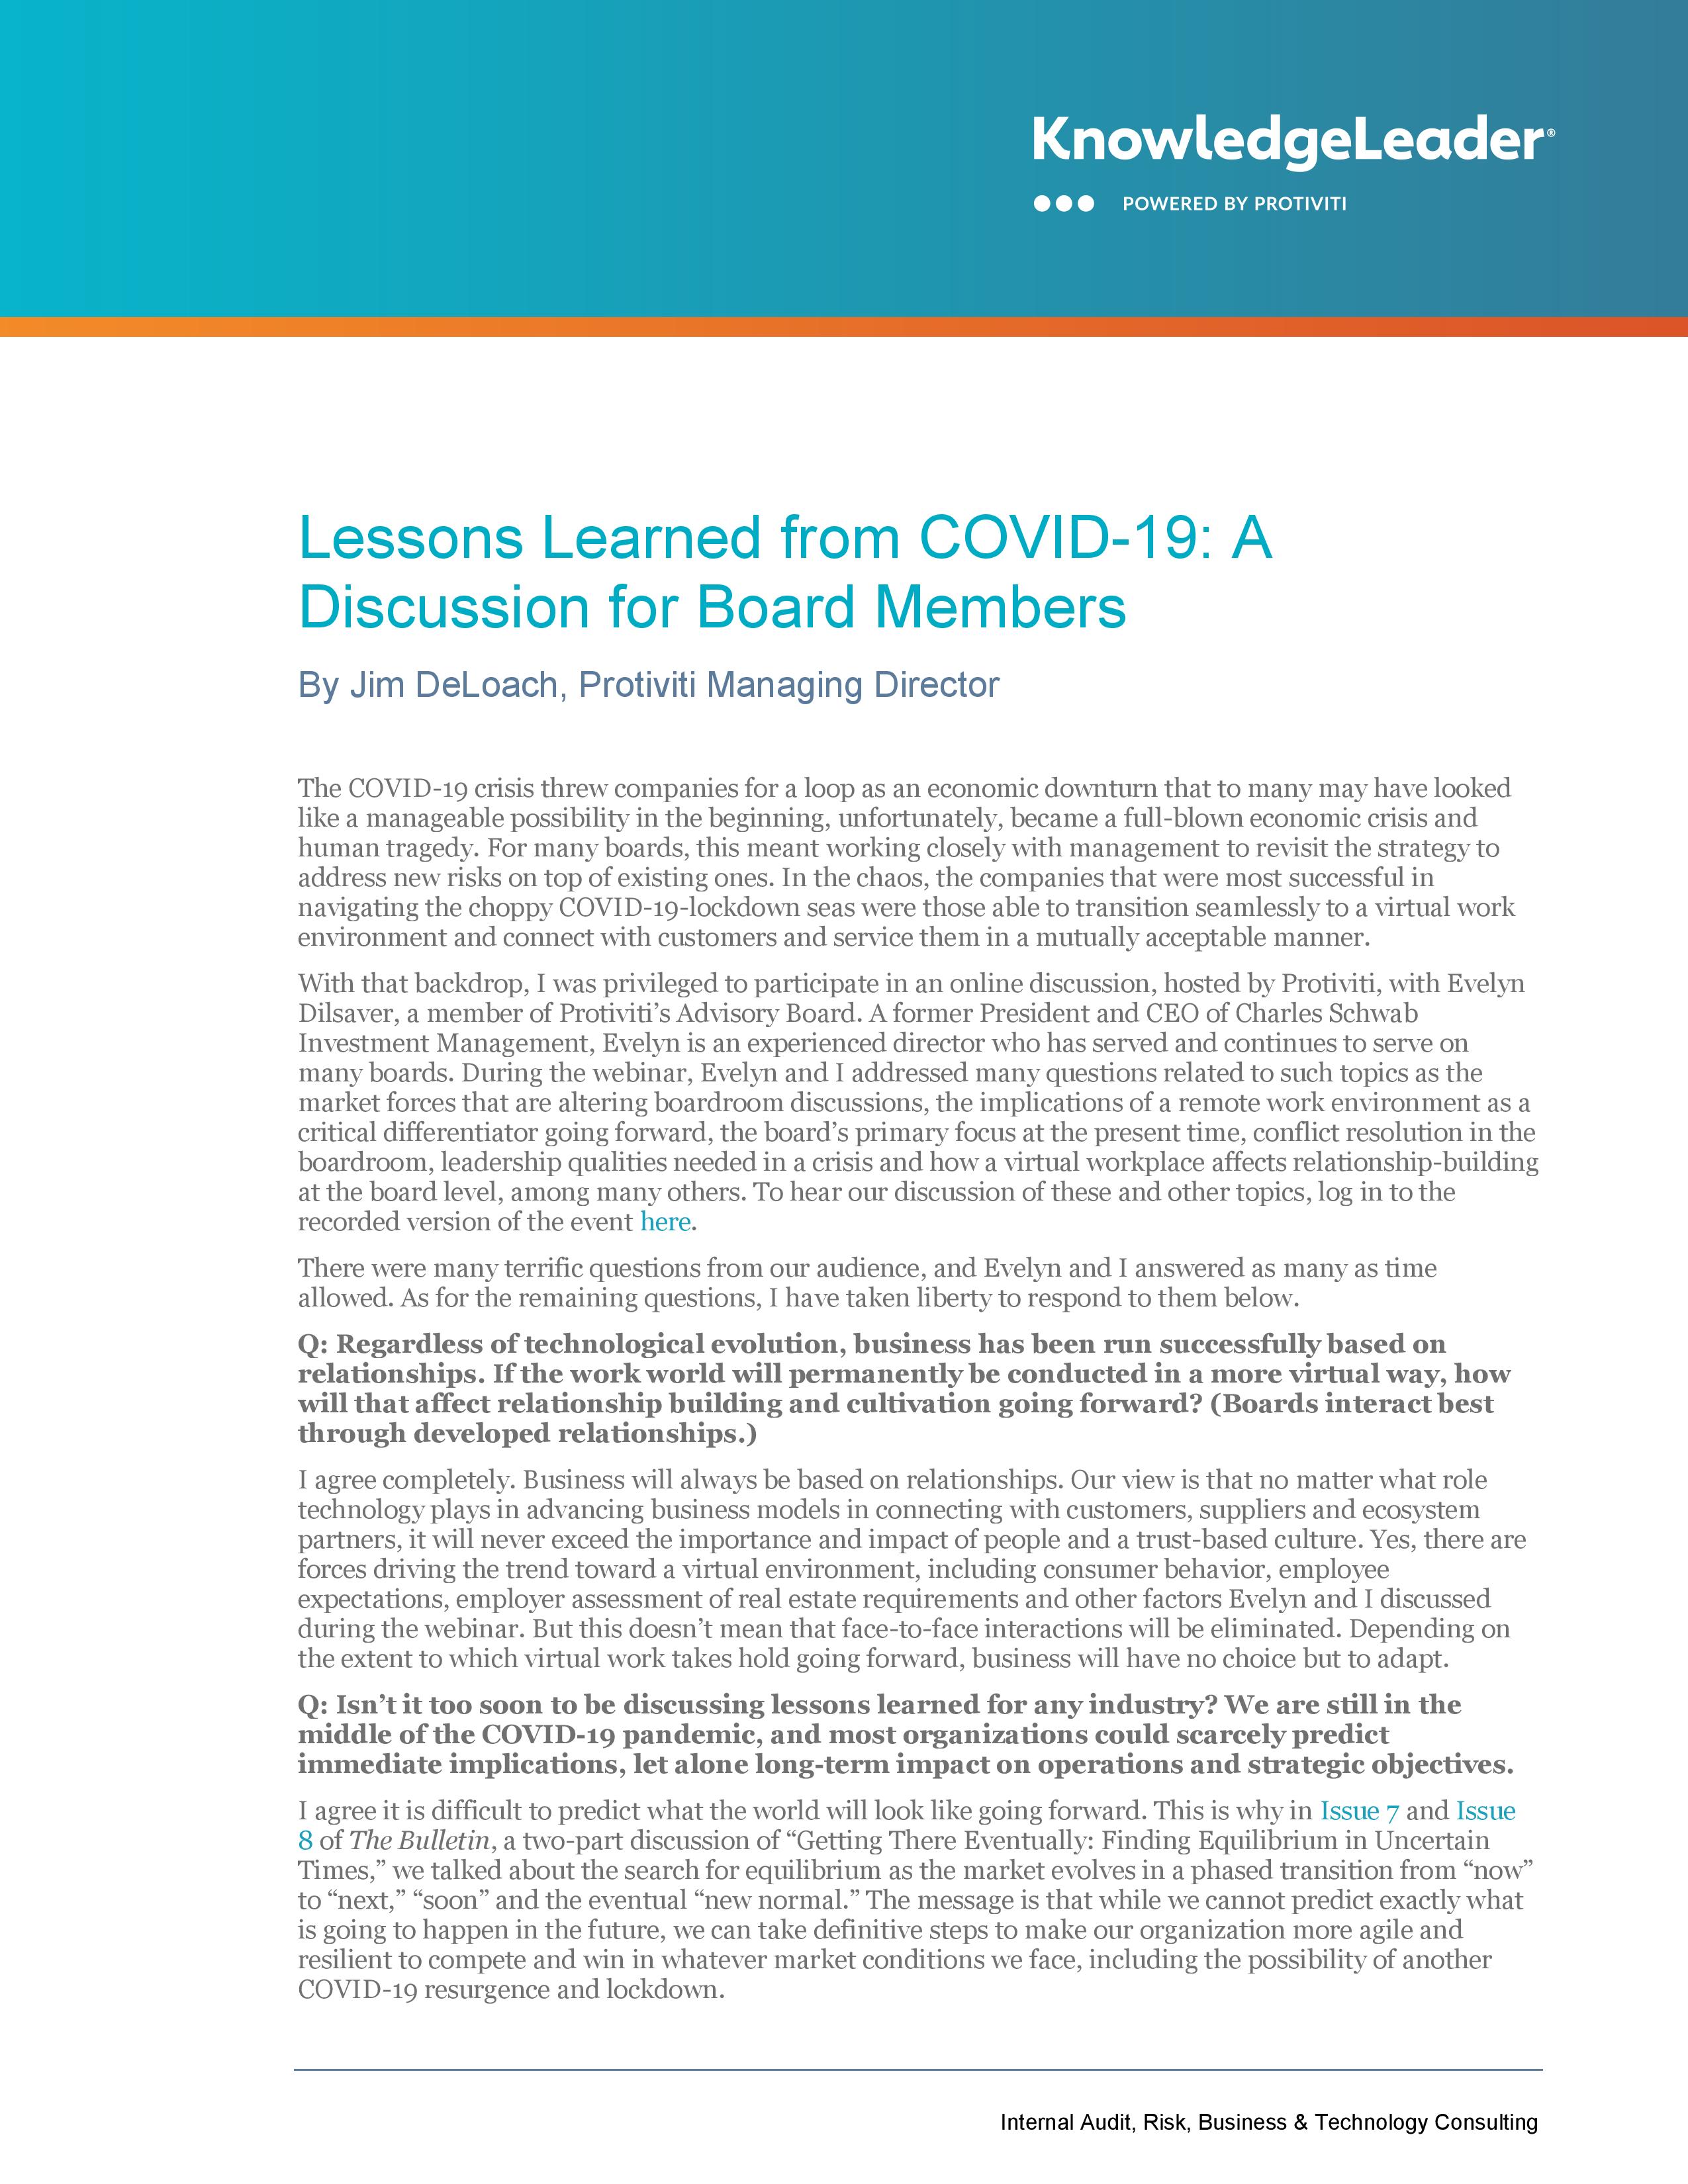 Screenshot of the first page of Lessons Learned from COVID-19: A Discussion for Board Members